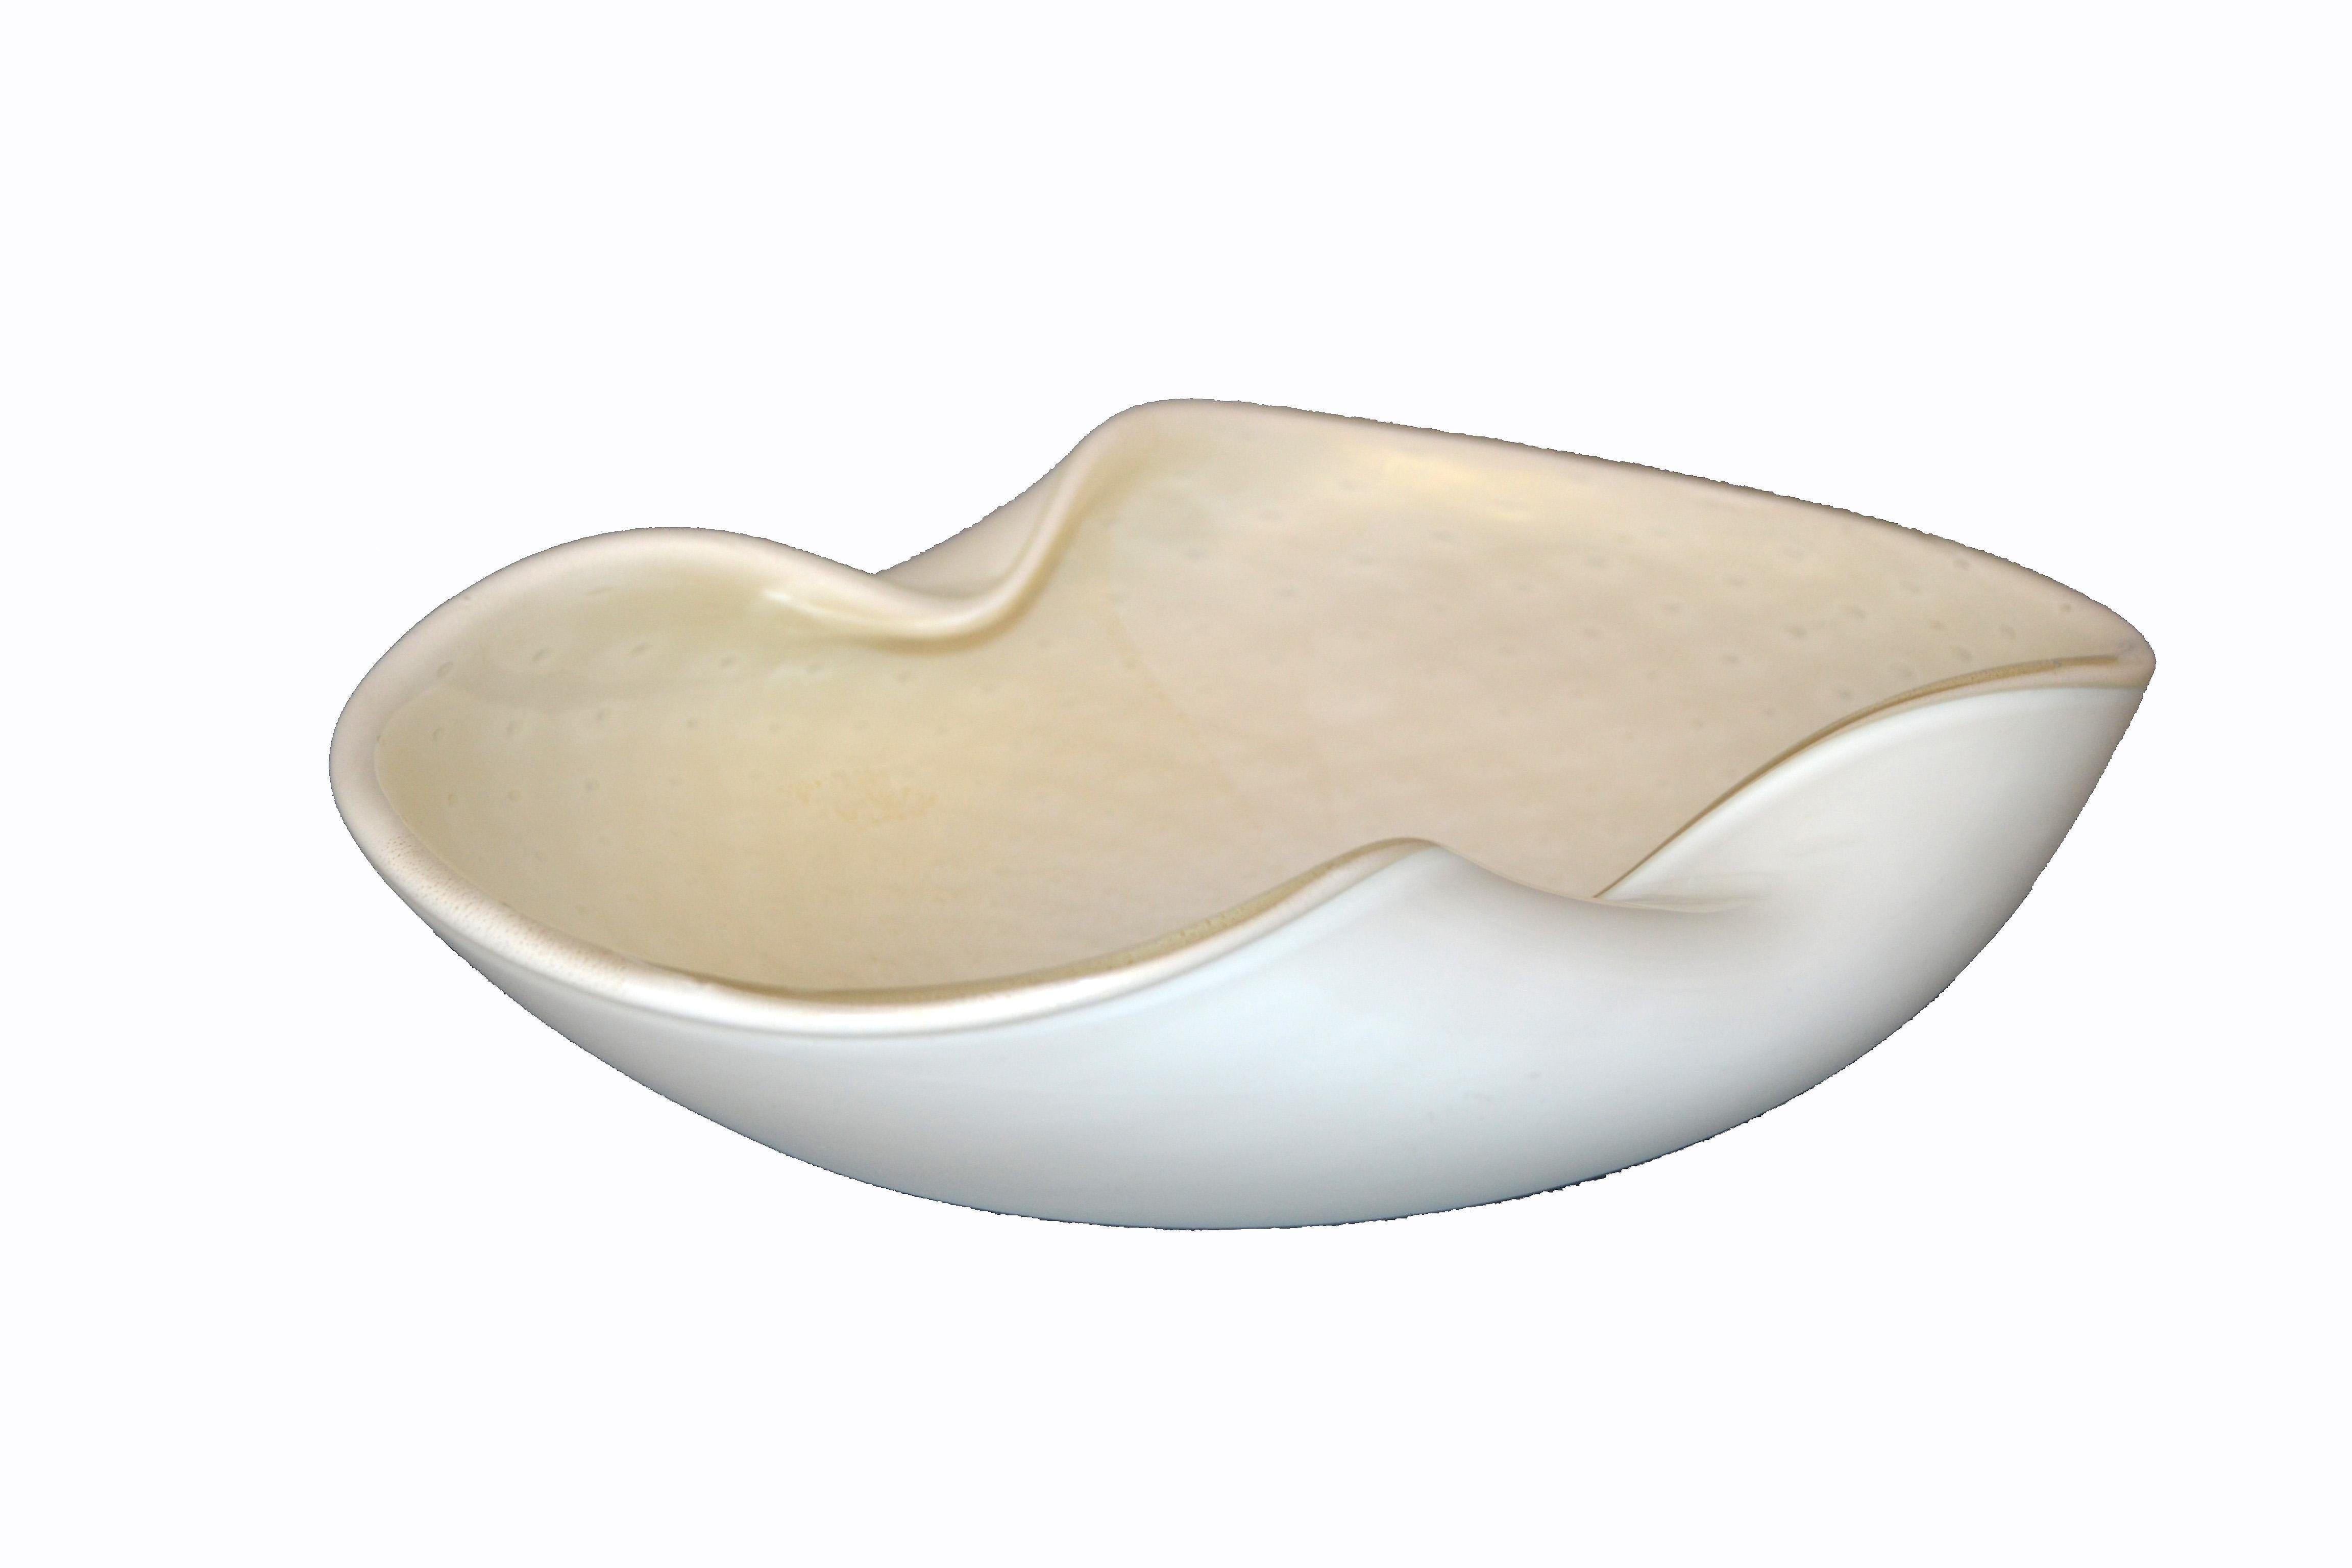 Large finest Murano glass ivory and gold flecks bowl / catchall.
No markings.
Simply beautiful.